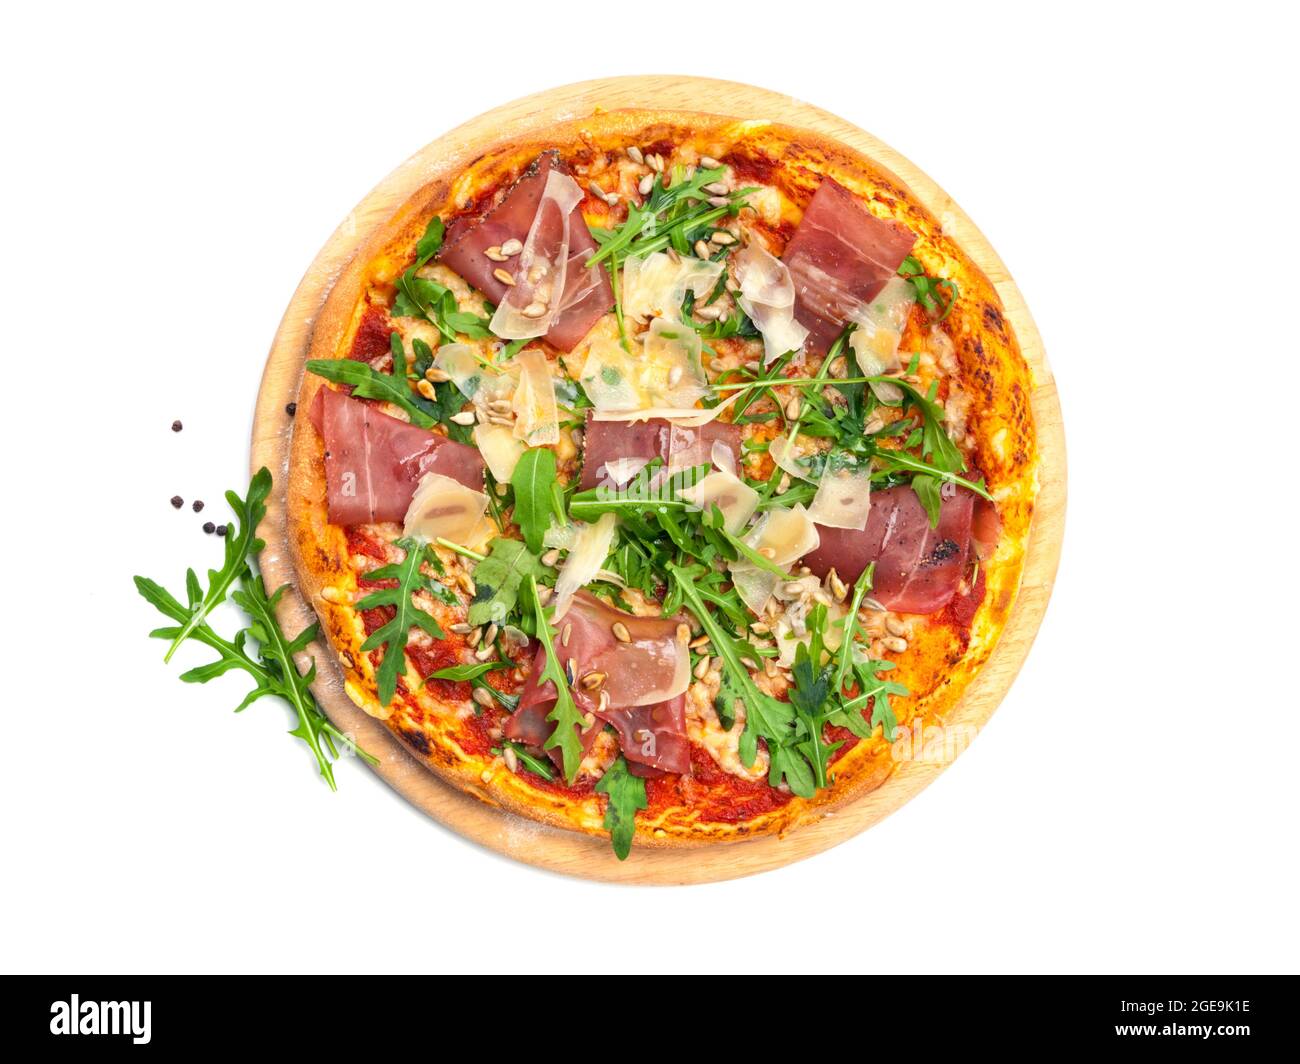 High angle view of pizza with dry cured ham, parmesan cheese, rocket leaves and ipne nuts on wooden platter, isolated on white background Stock Photo